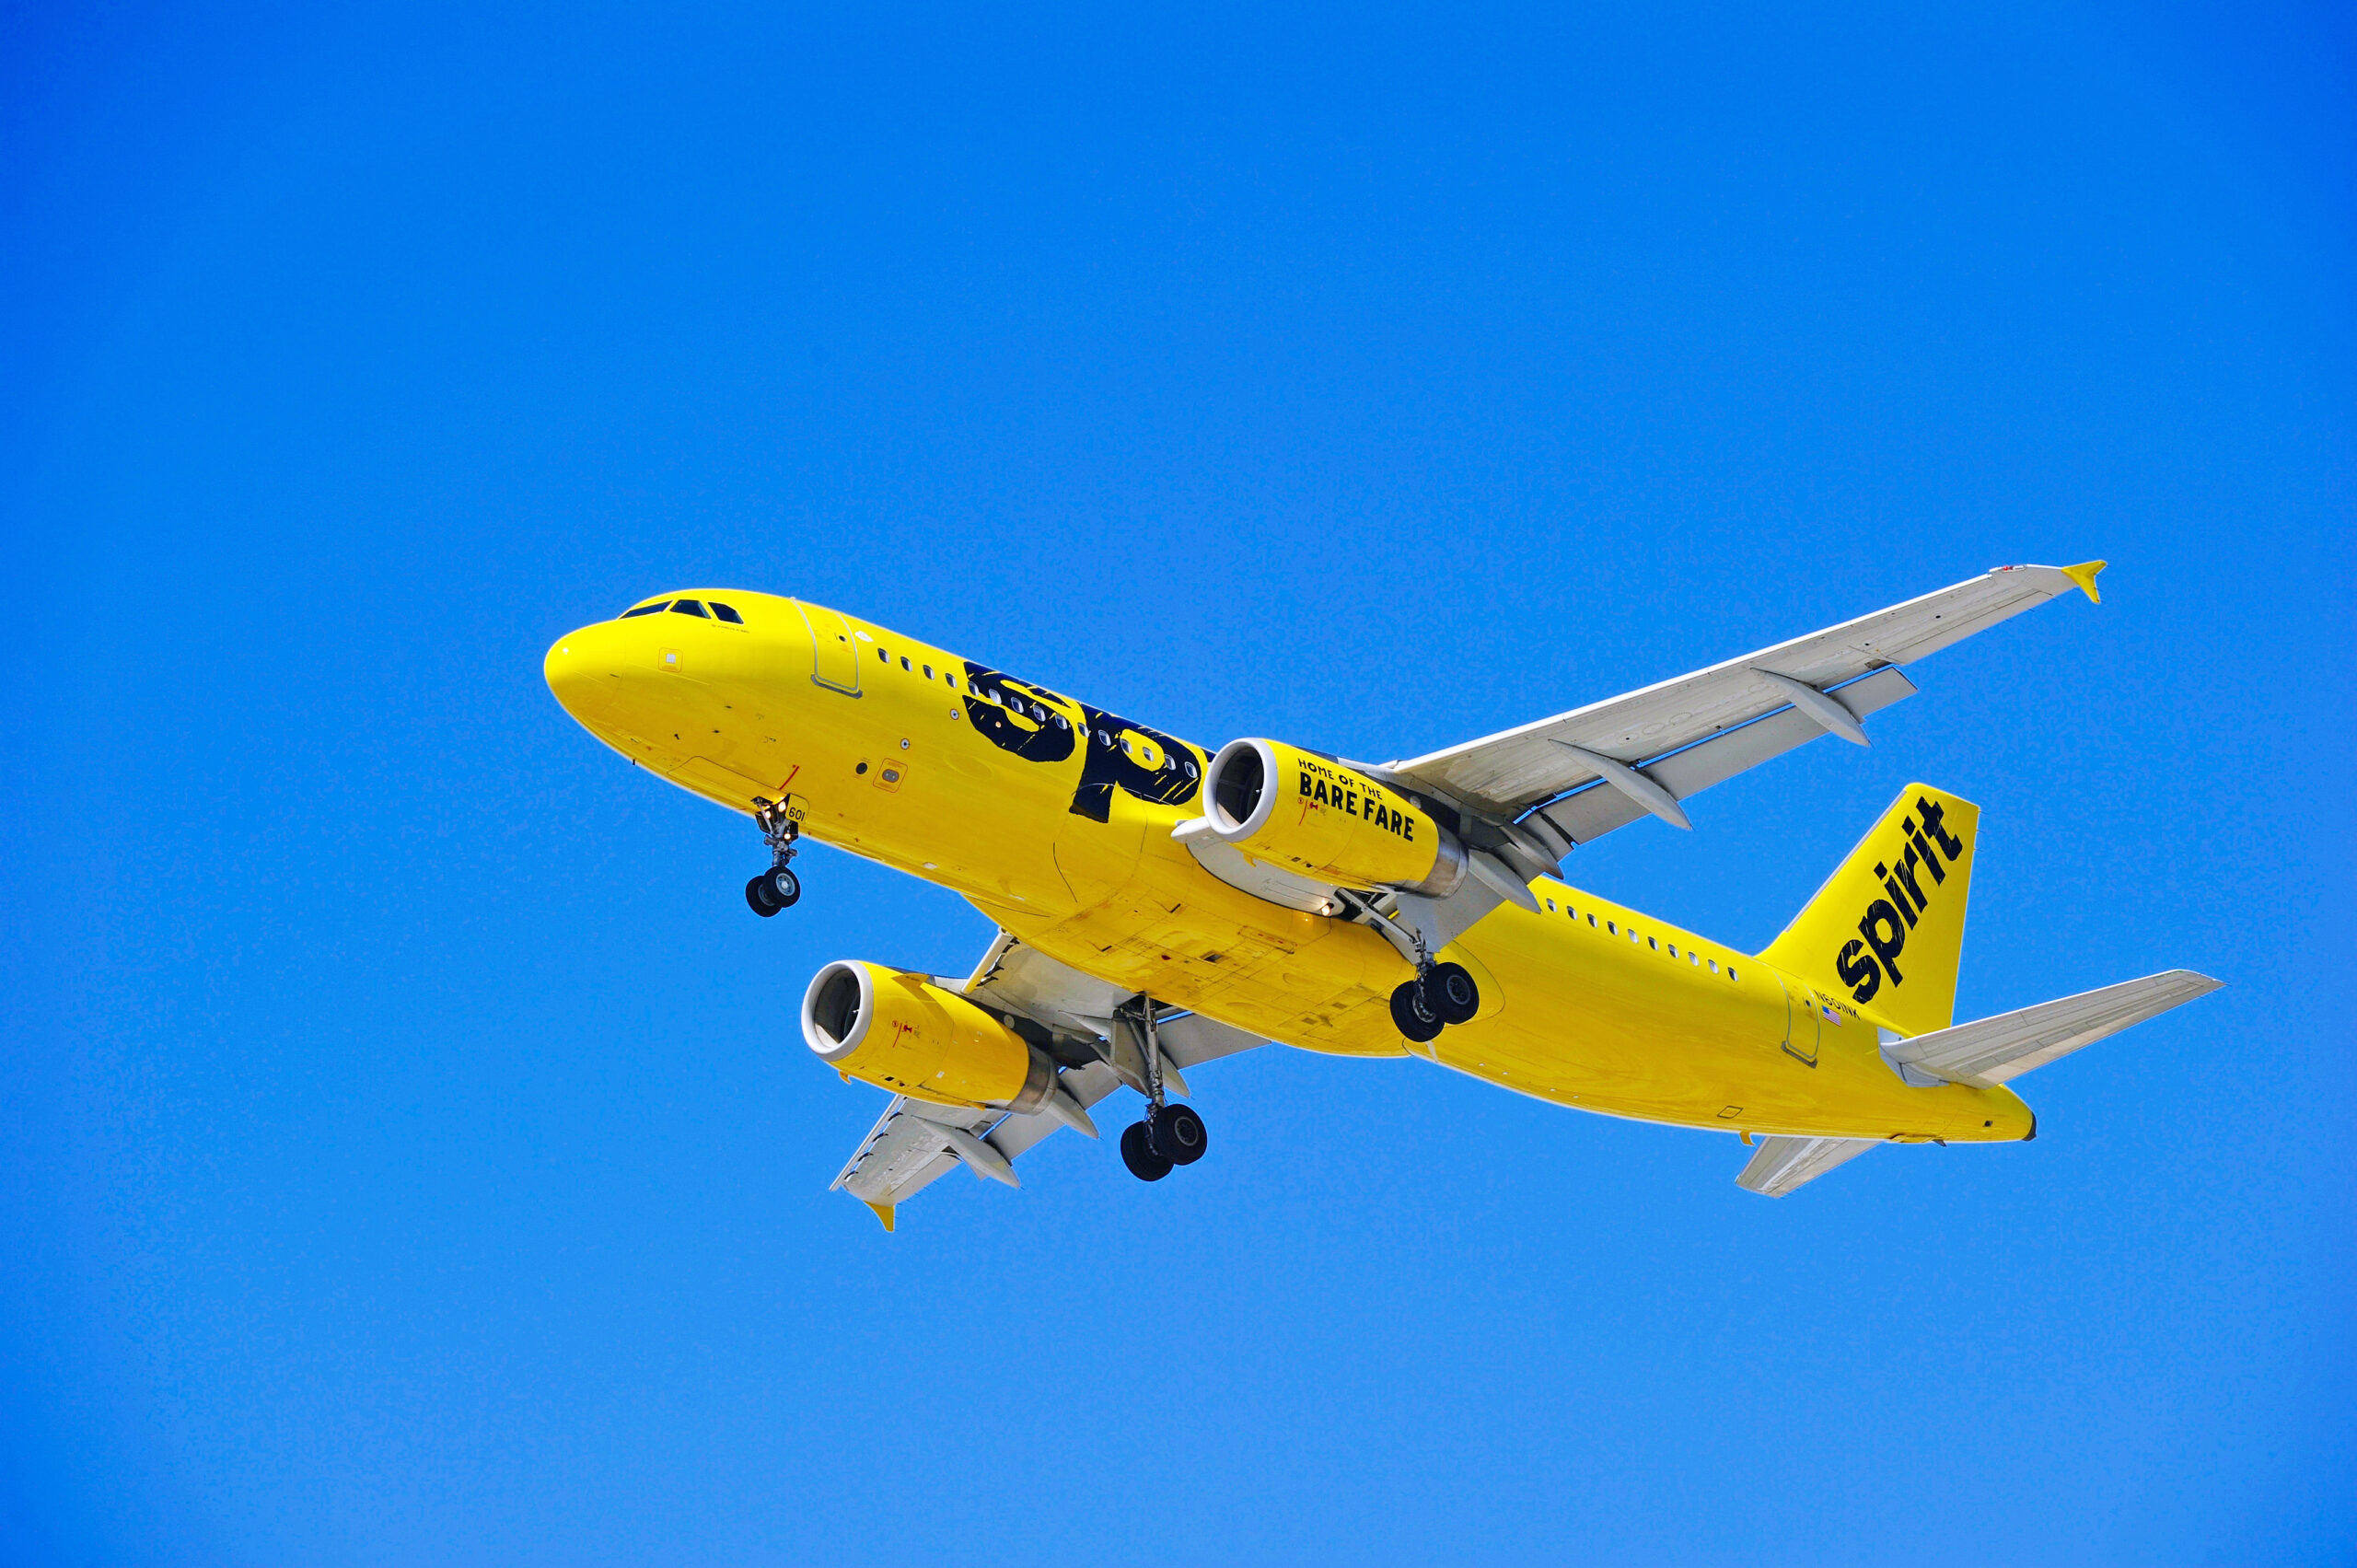 Spirit Airlines carry-on and checked baggage policies | Million Mile ...